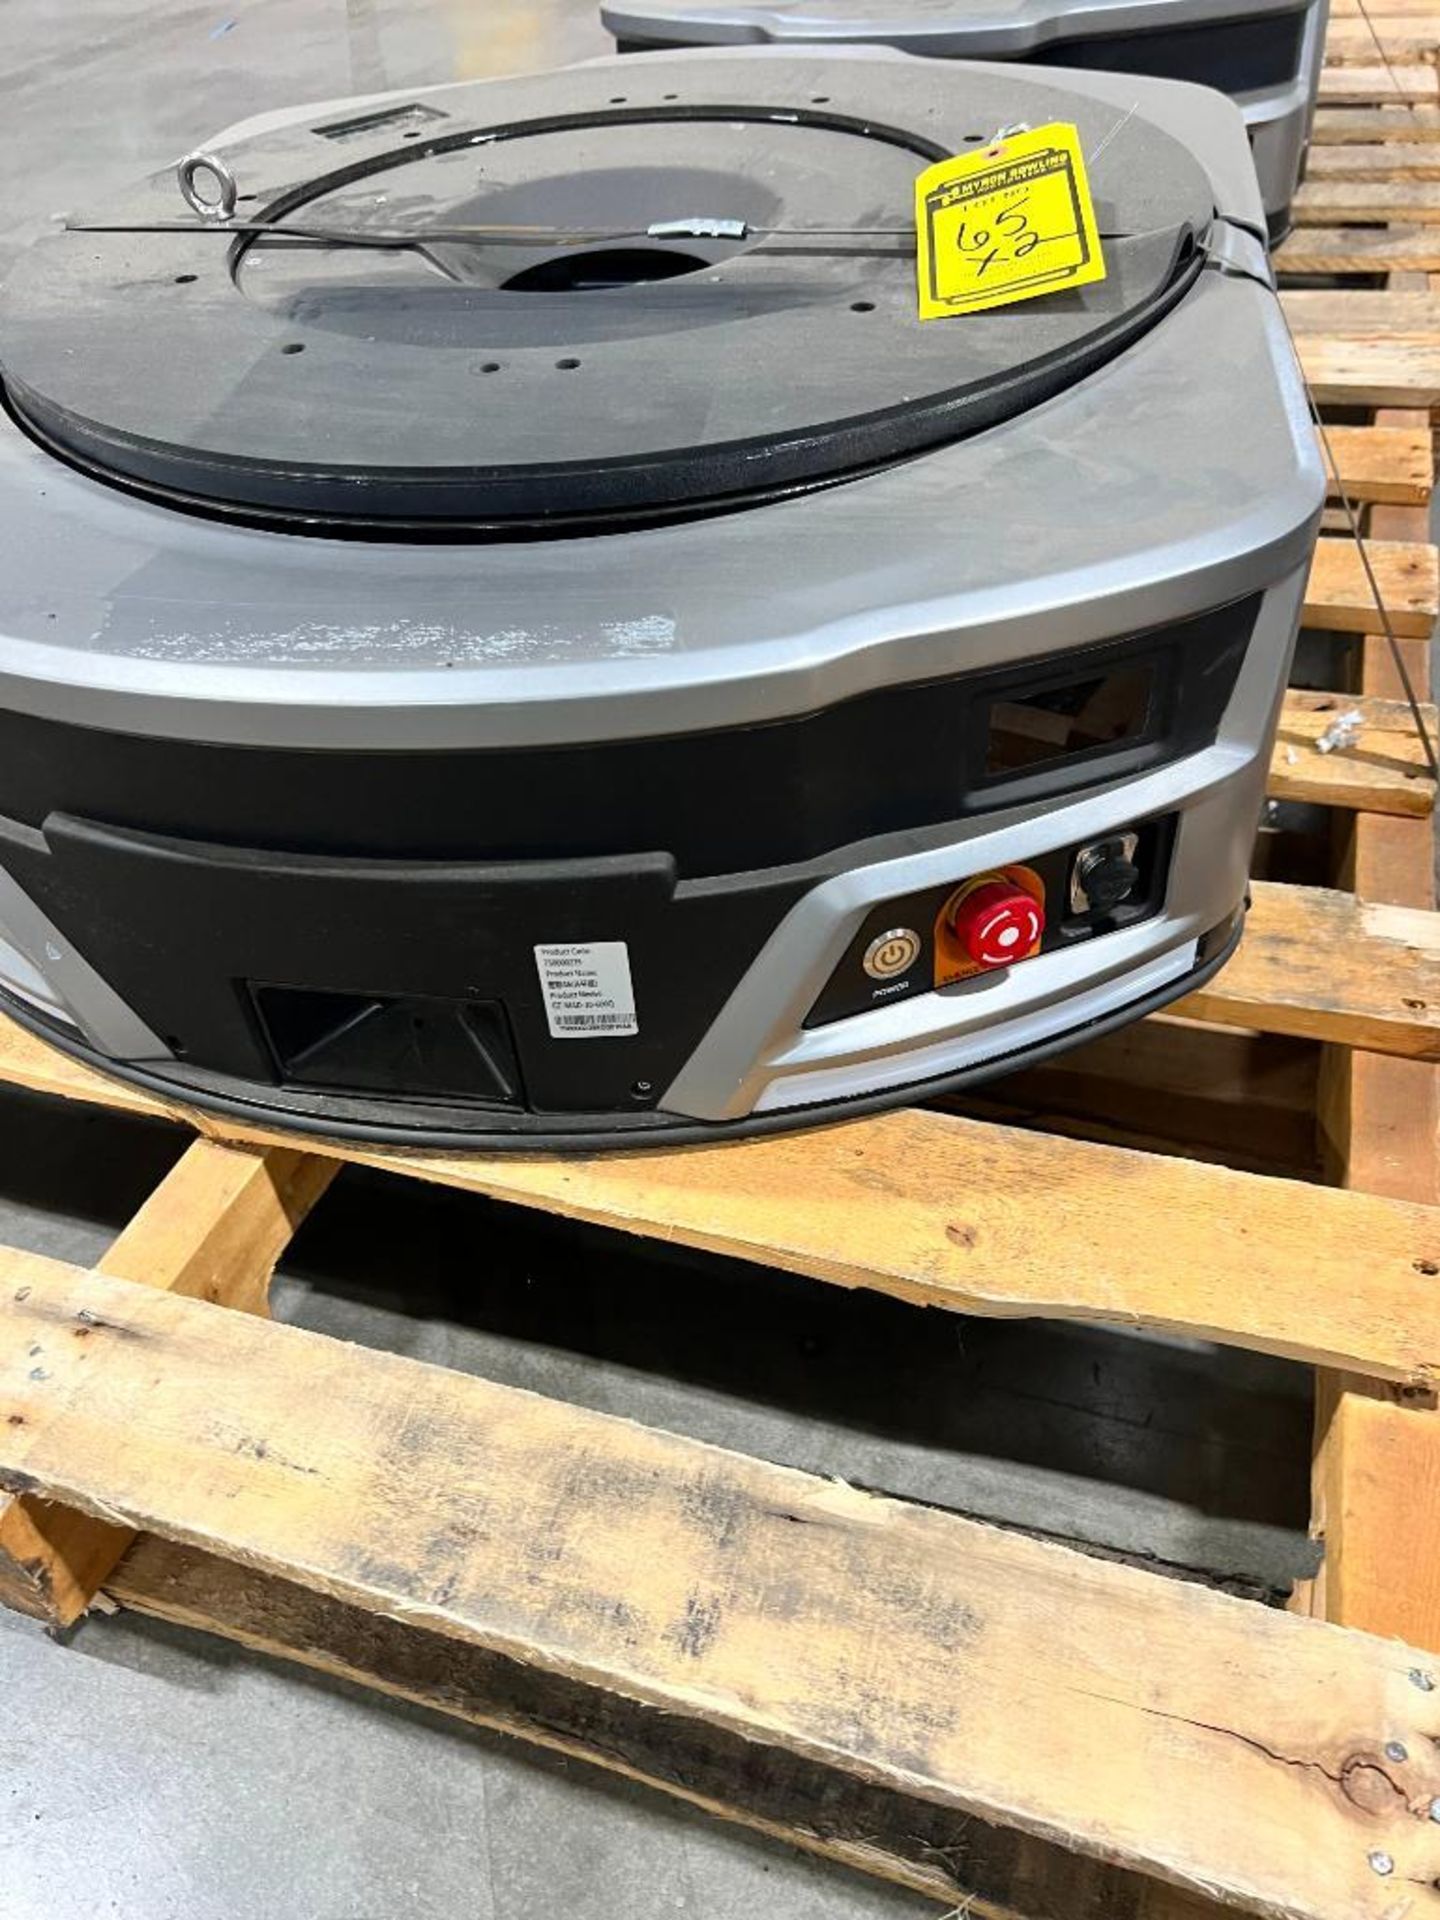 (2x) Invata Robots, AGV Name: ANTS 6 AGV, AGV Model: GZ-MAD-20-600Q ($20 Loading Fee Will Be Added T - Image 2 of 6